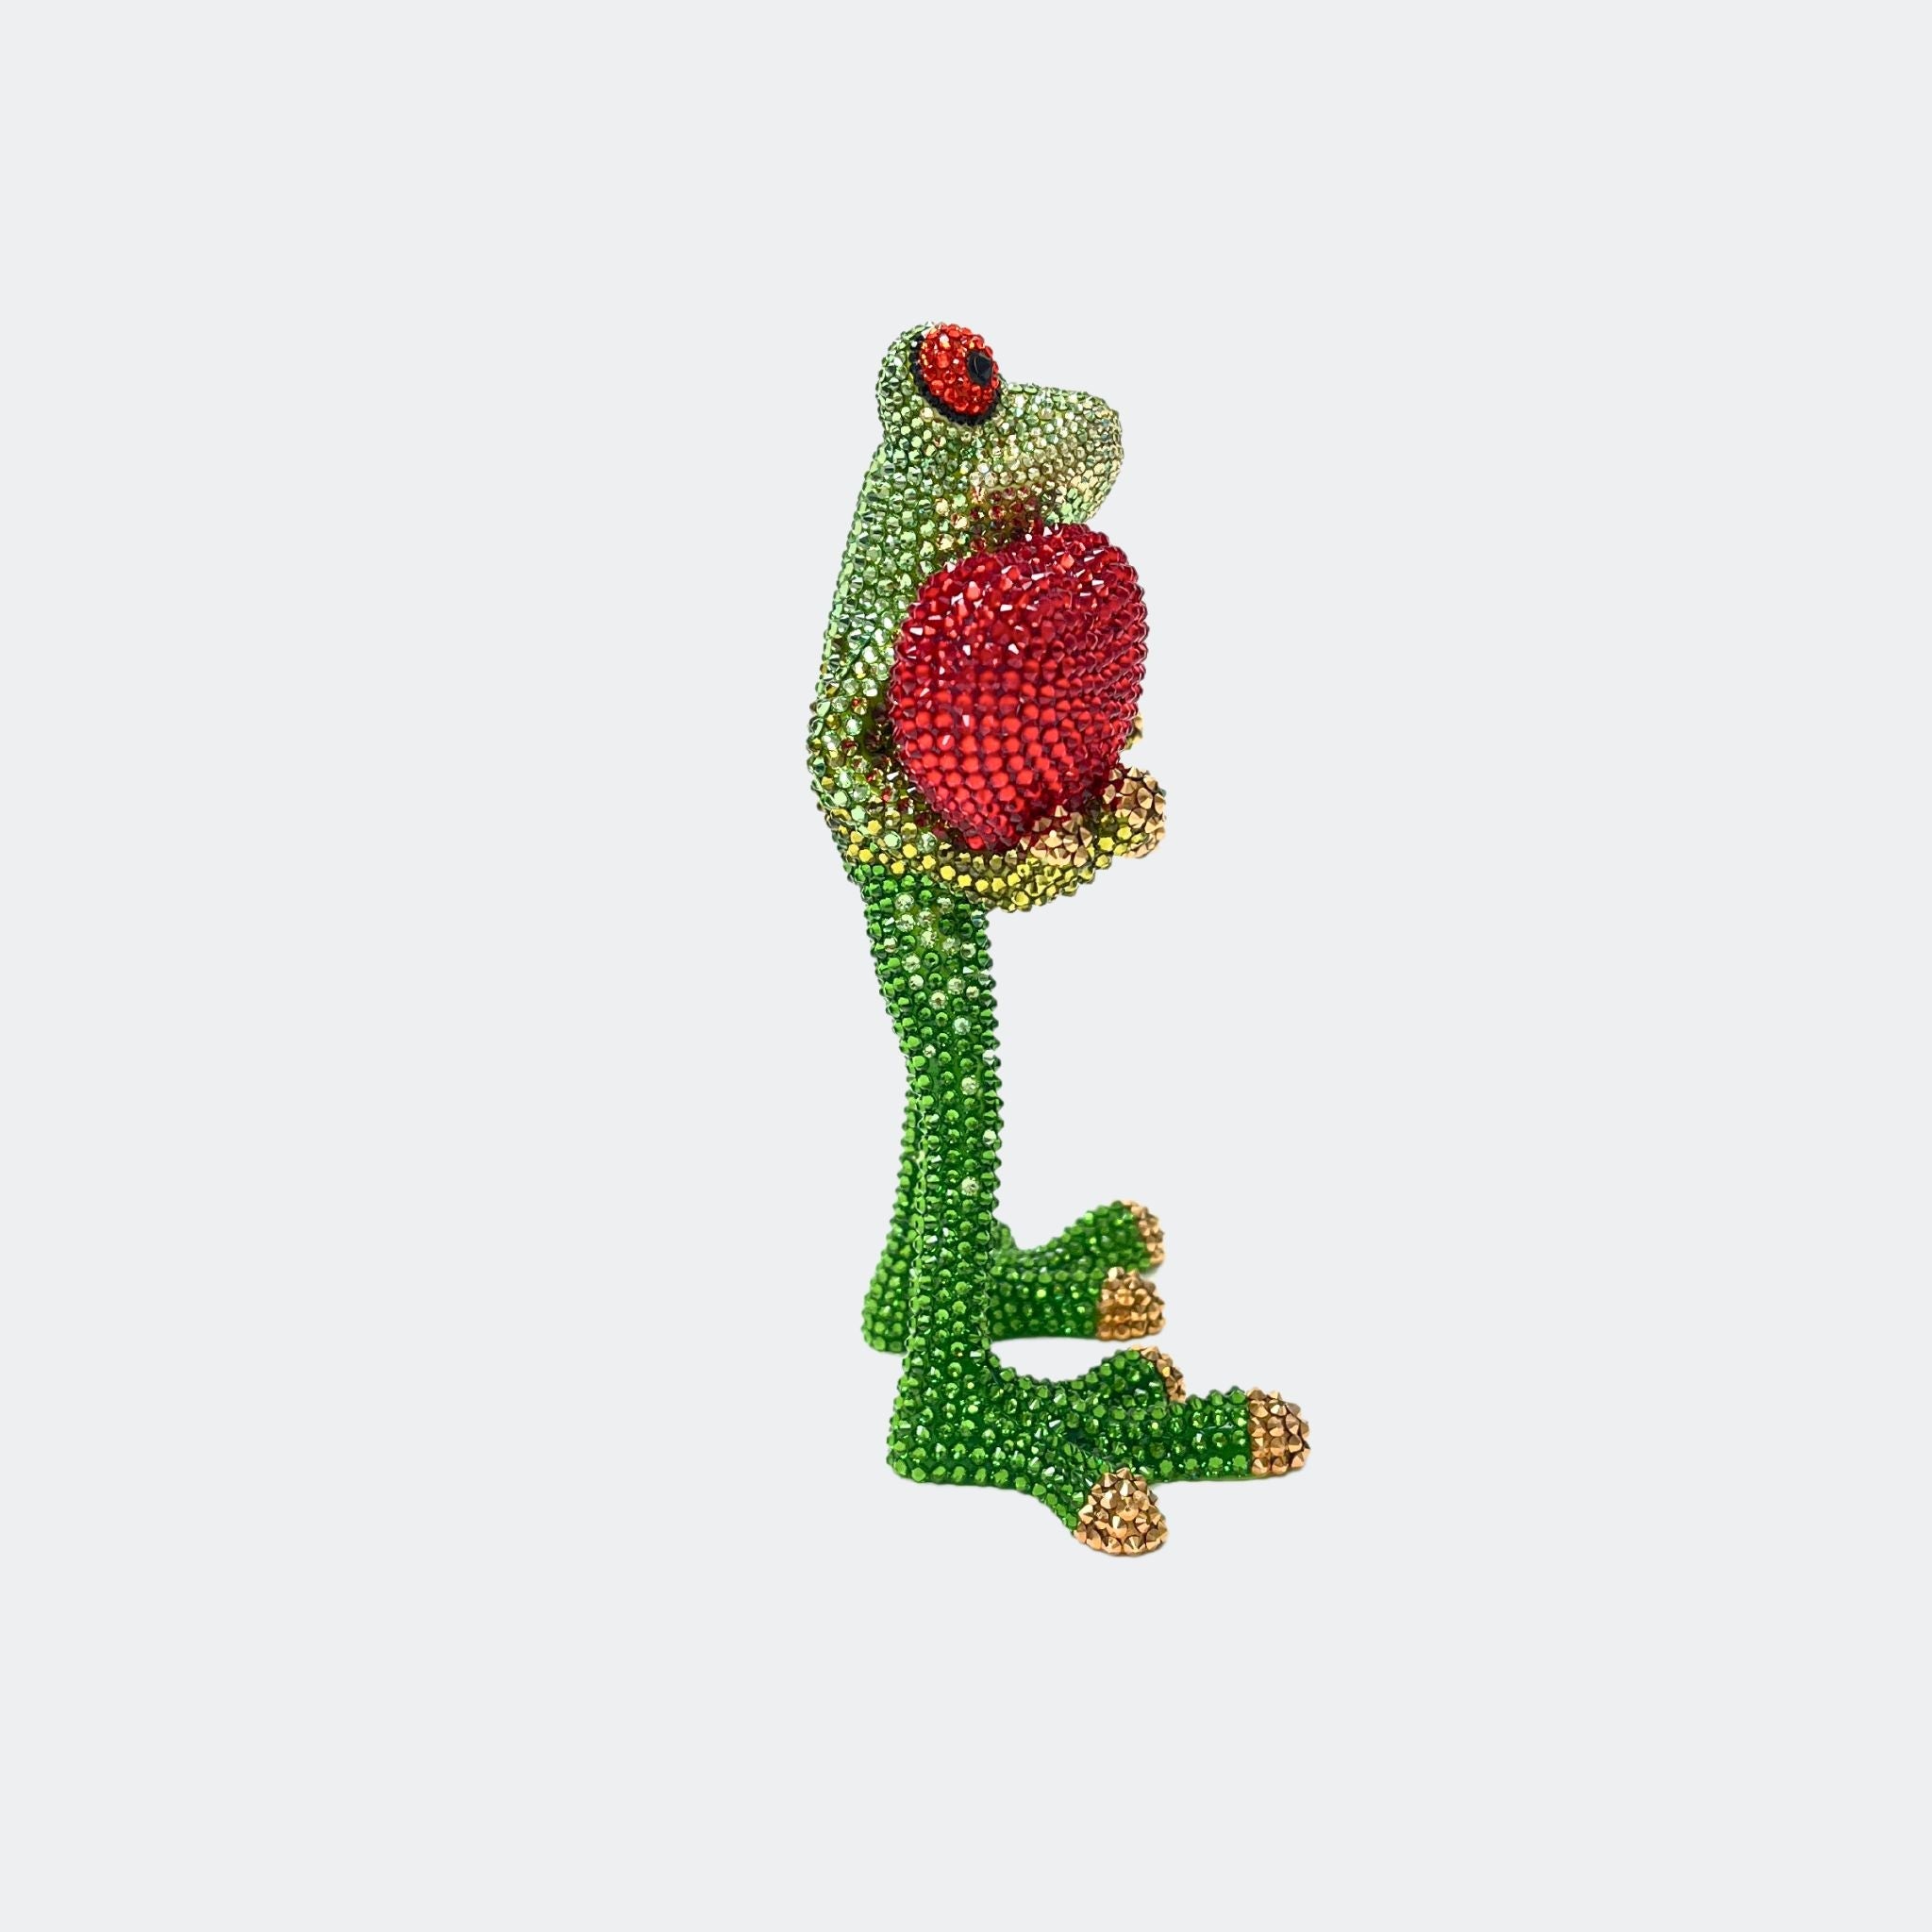 FROG WITH RED HEART - Jimmy Crystal New York